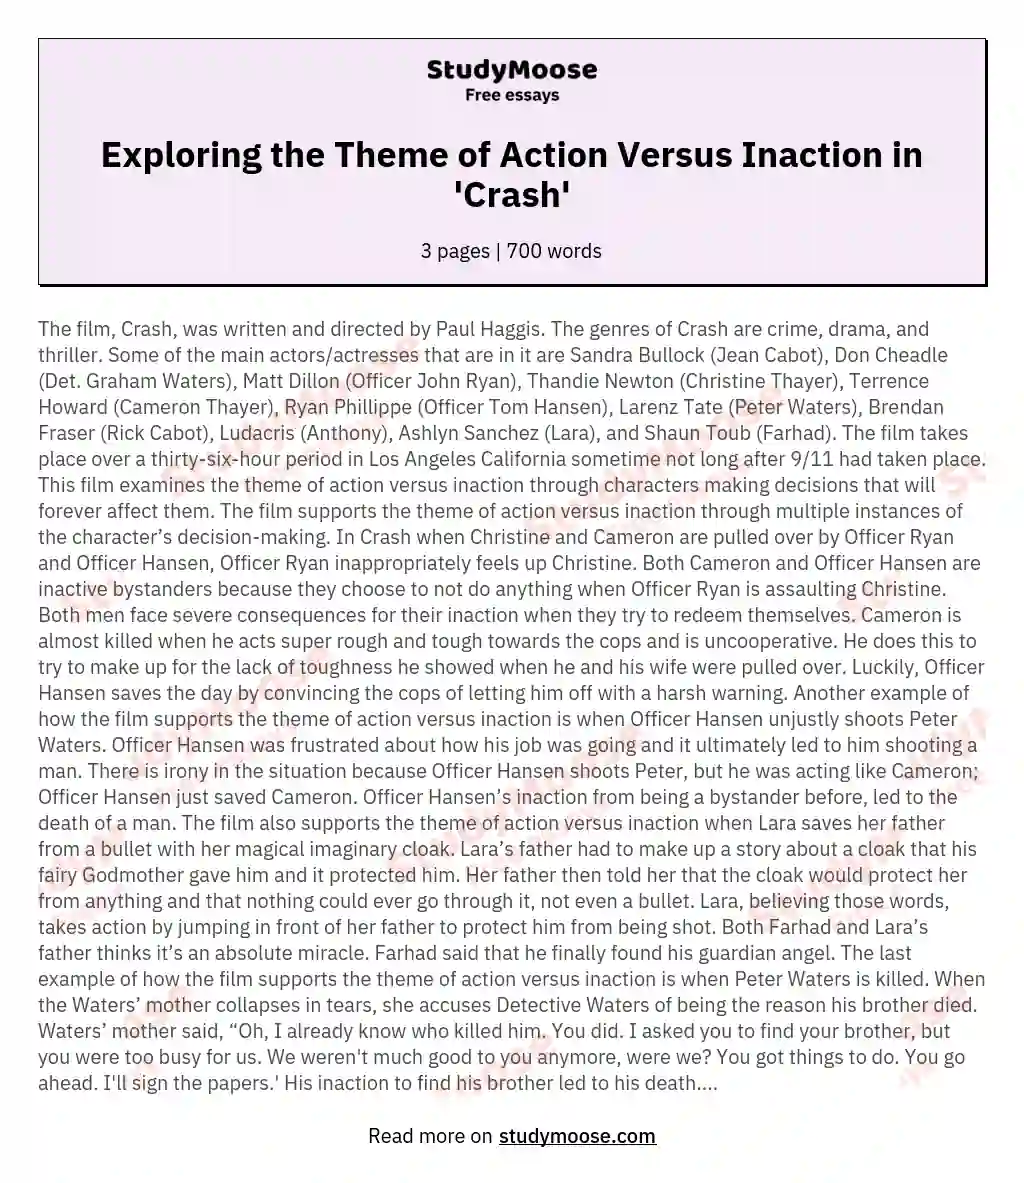 Exploring the Theme of Action Versus Inaction in 'Crash' essay